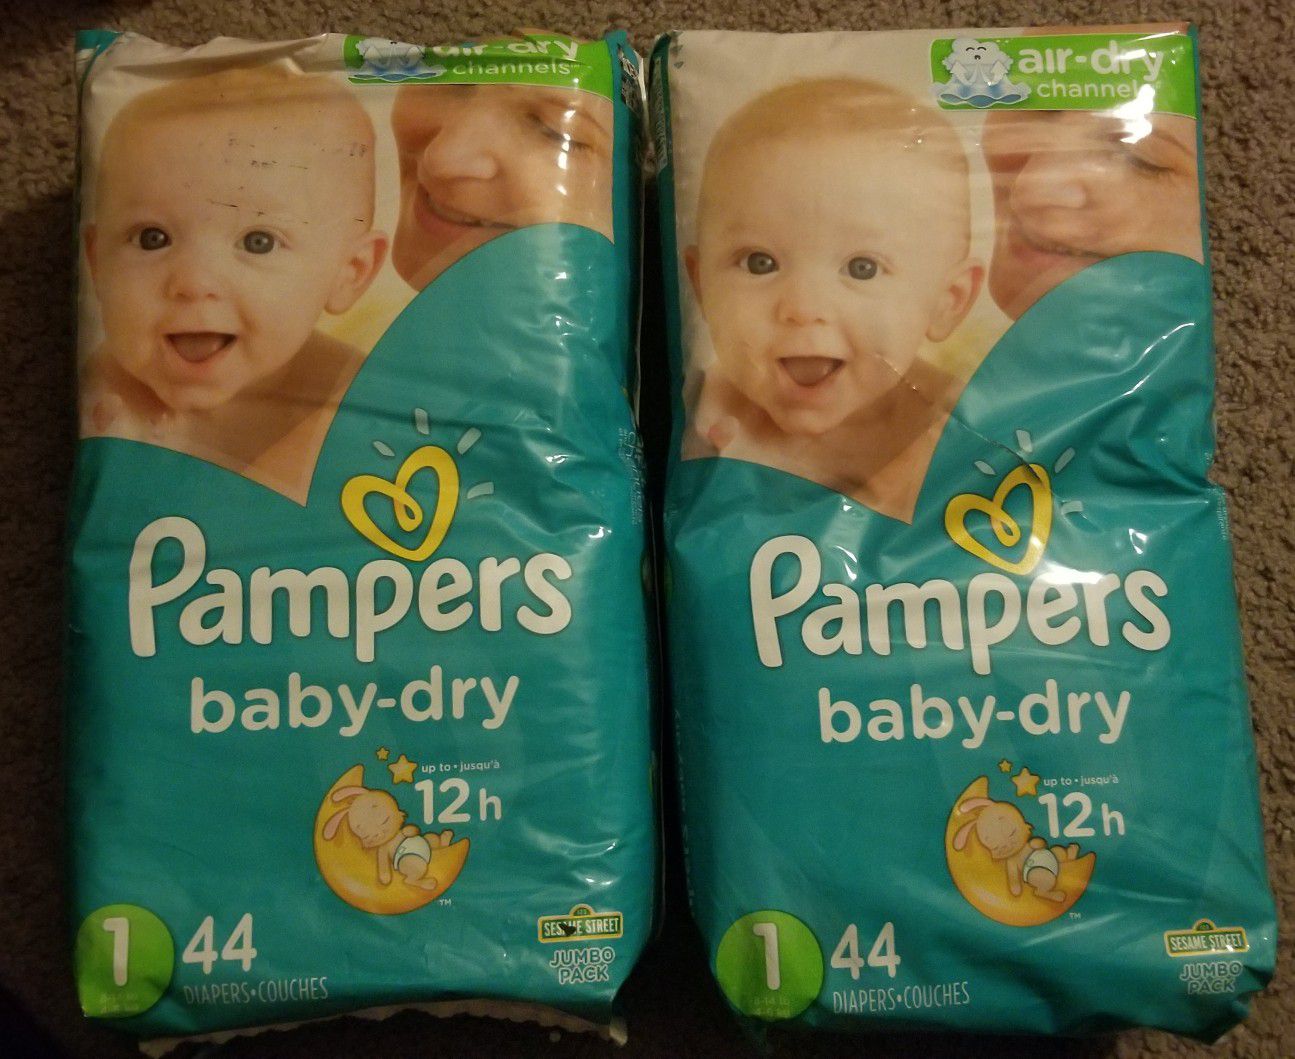 Pampers Diapers - Size 1 Unopened (88 total count)